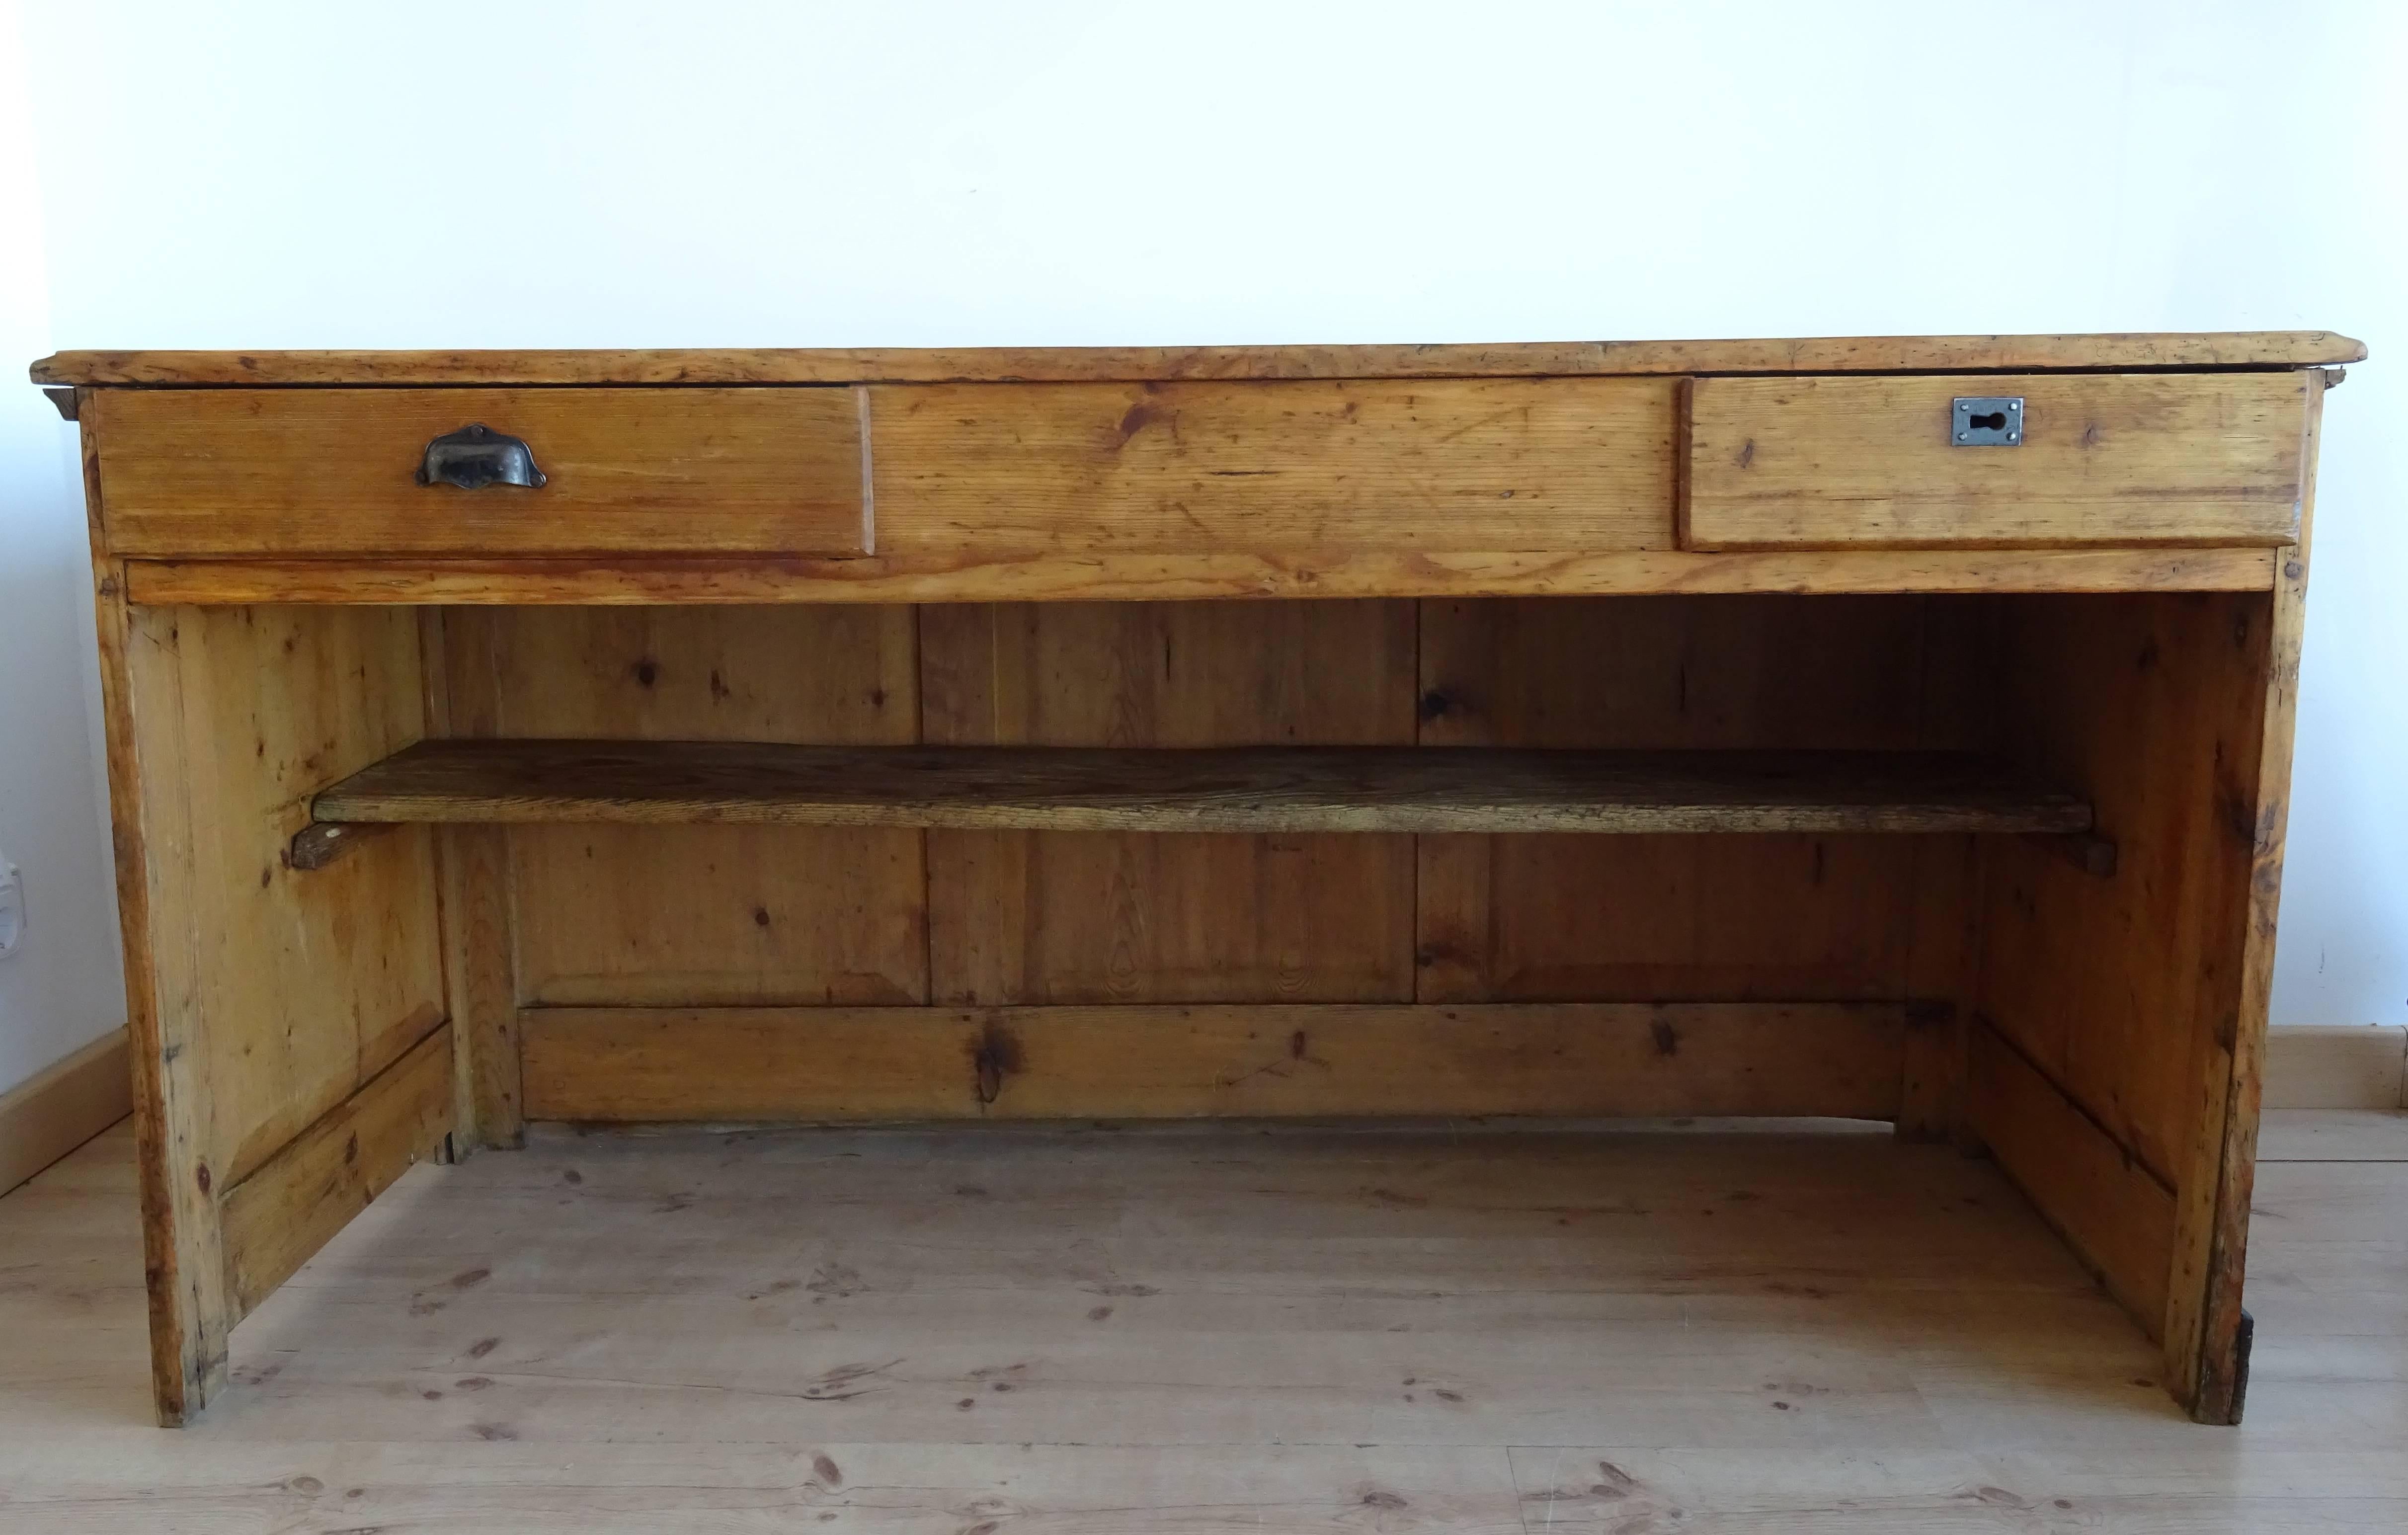 Vintage counter originated from a shop in France in the early 20th century. It is made from pine and features two drawers and a low shelving unit. It is in very good vintage condition with some signs of wear consistent with age and use. Please see